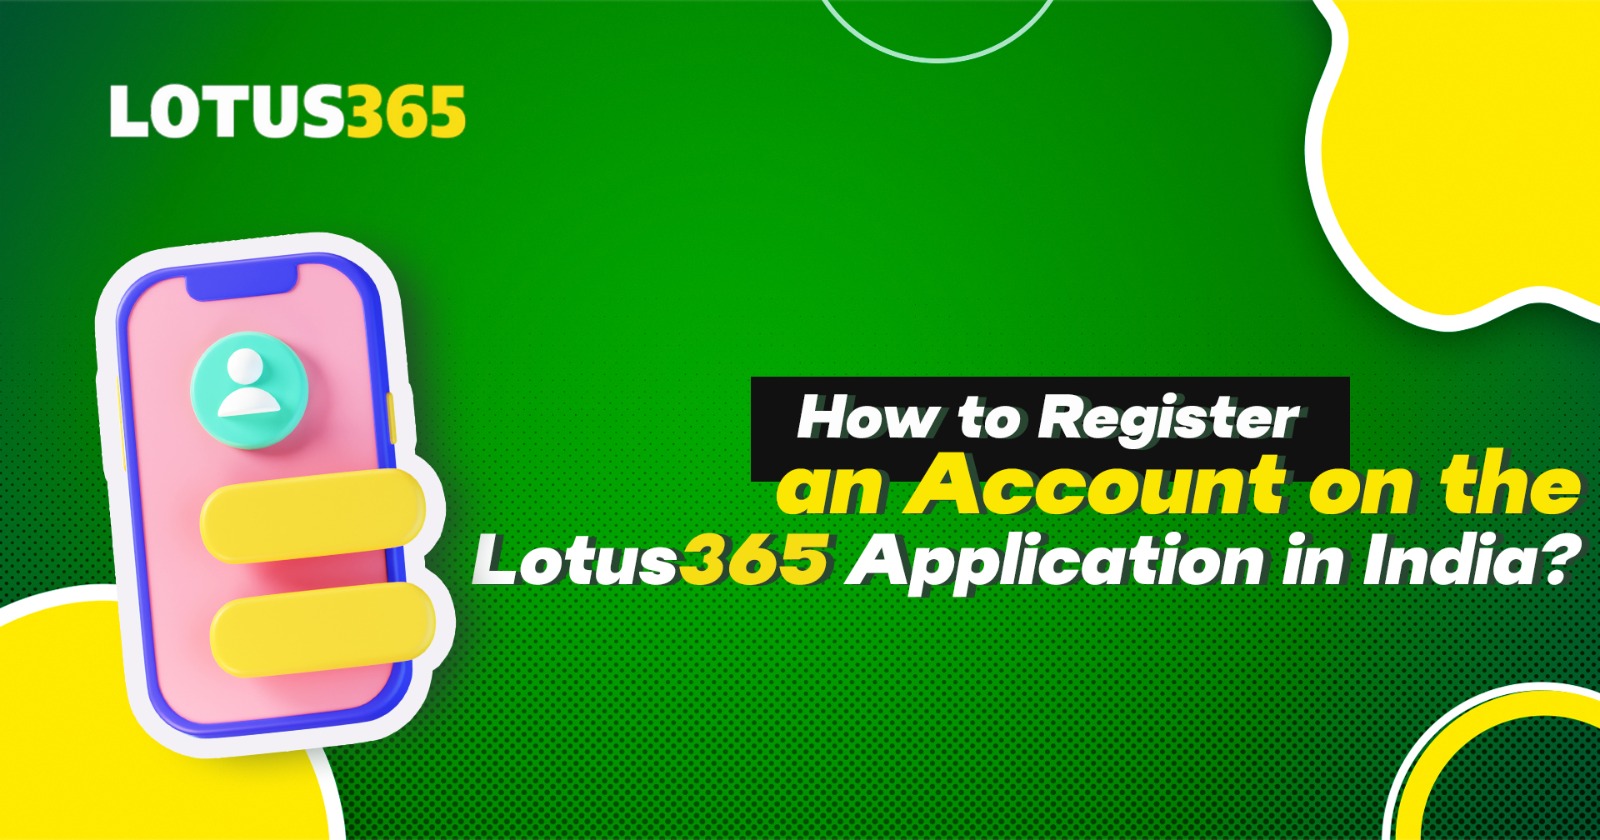 How to Register an Account on the Lotus365 Application in India